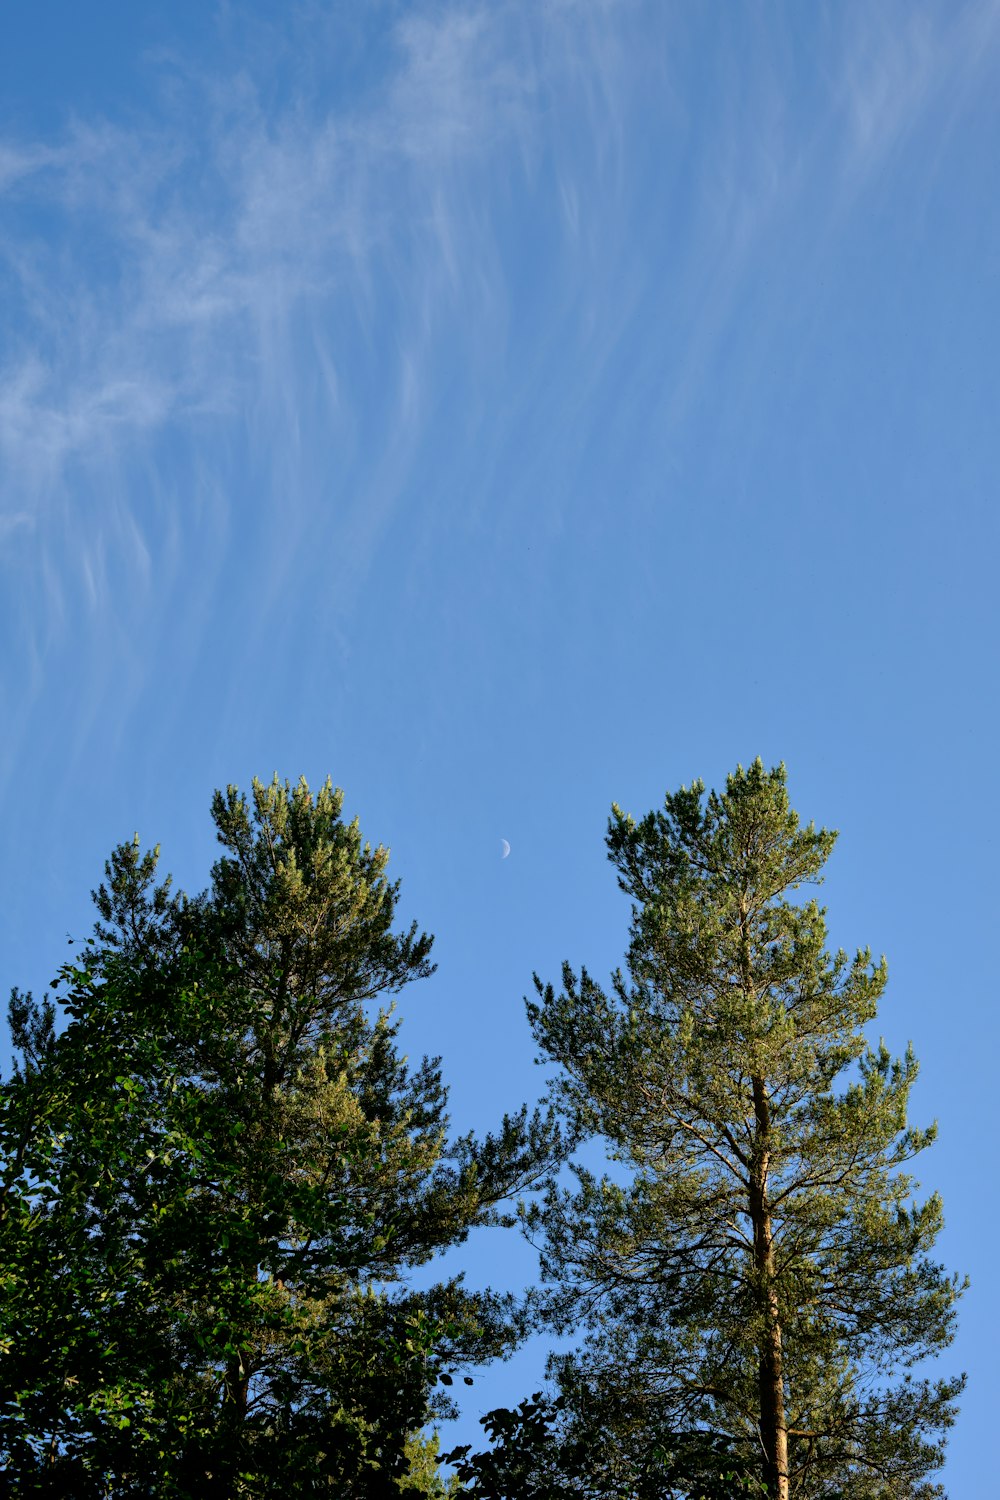 a clear blue sky with some clouds and some trees